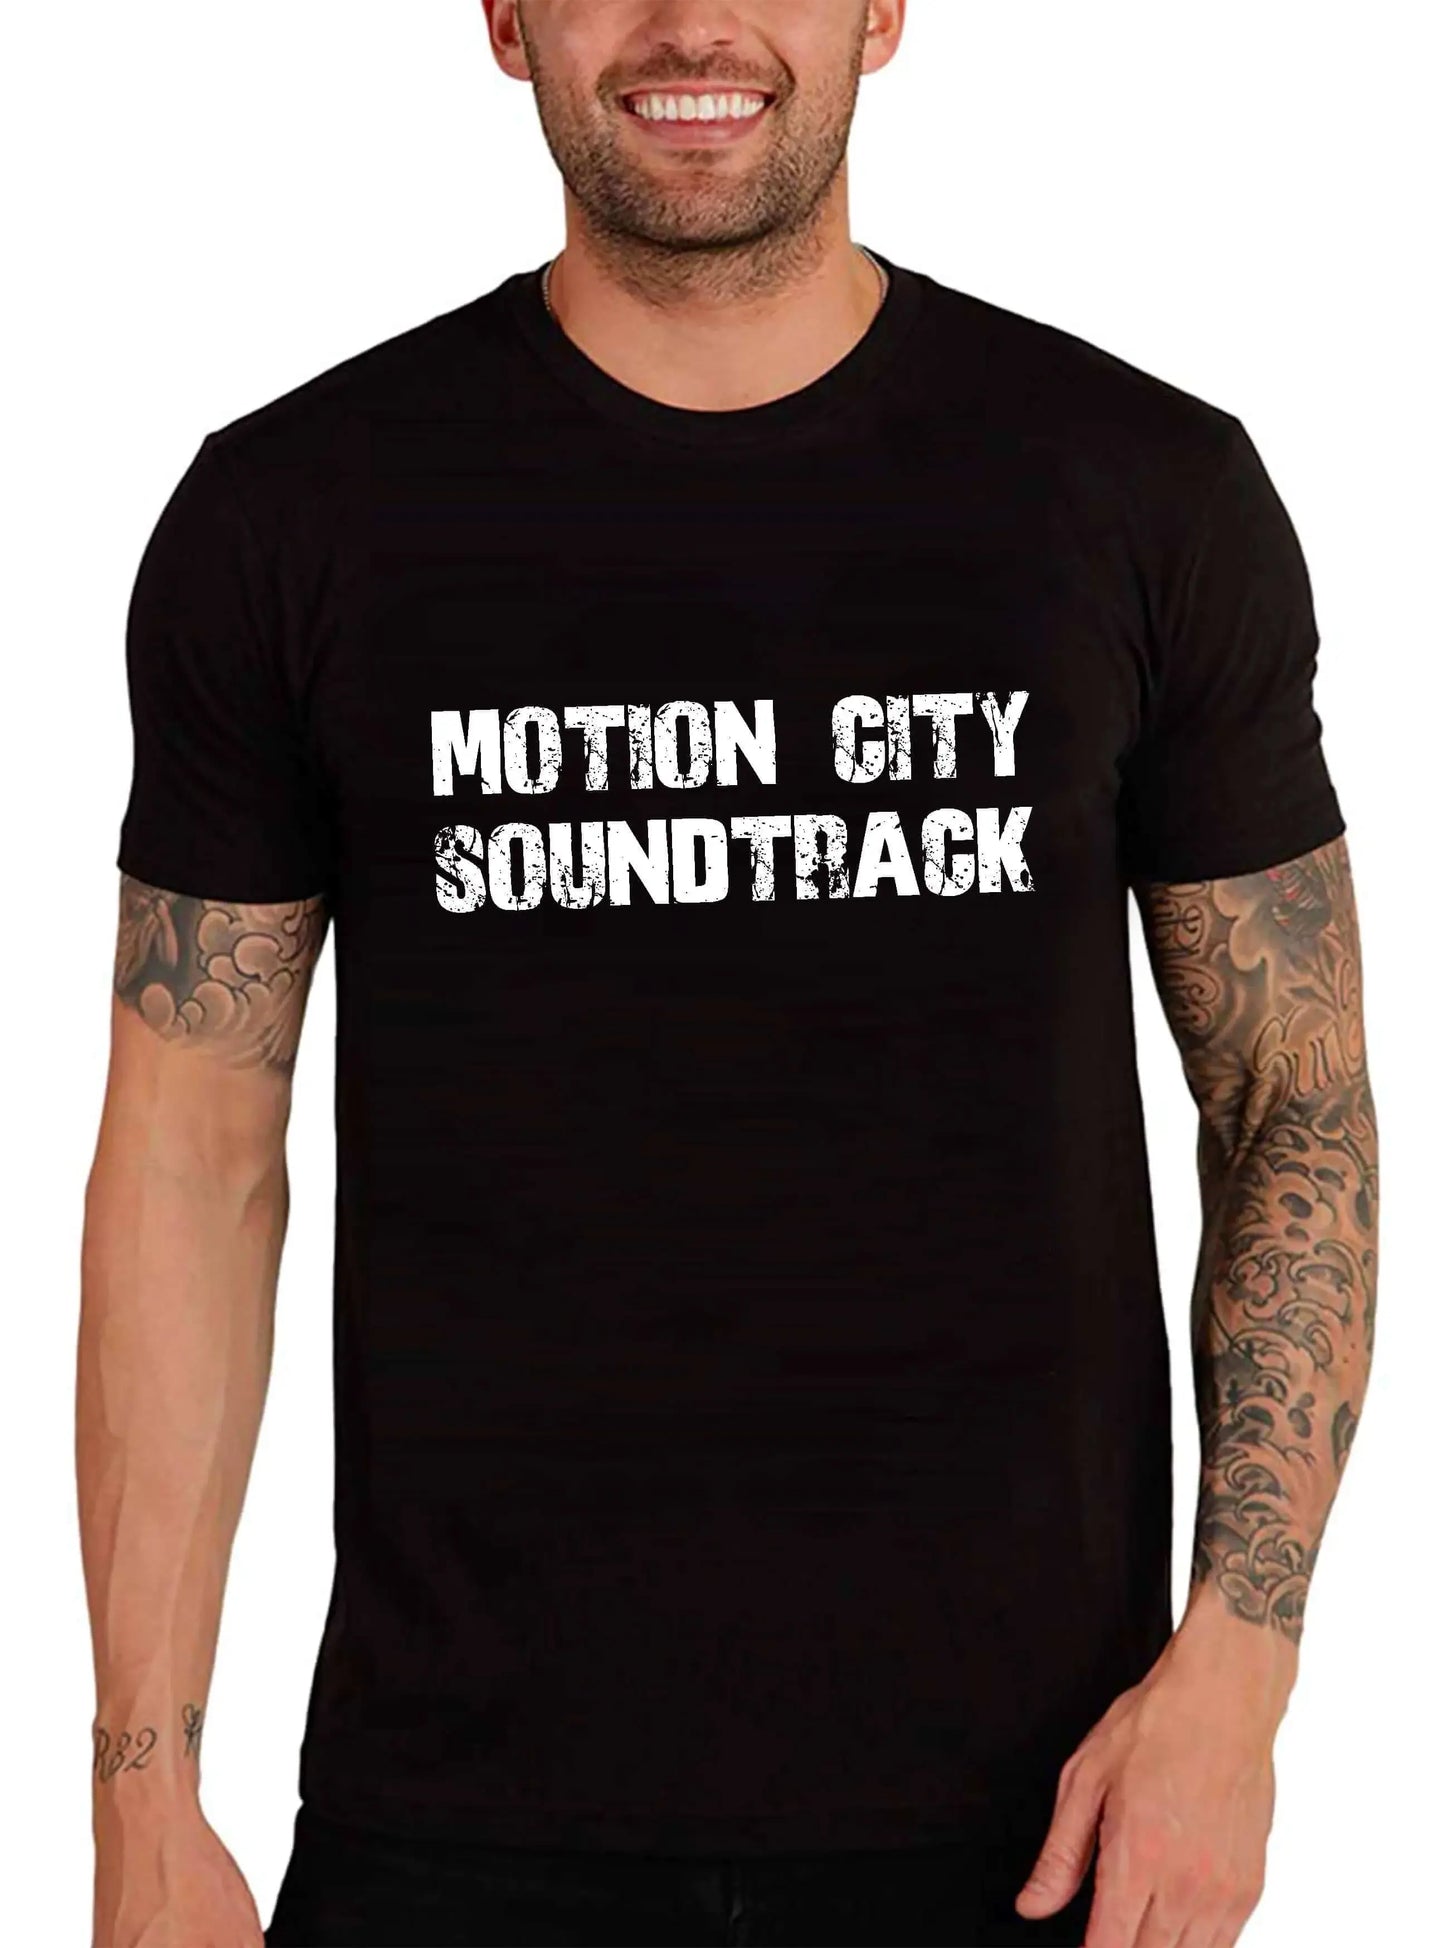 Men's Graphic T-Shirt Motion City Soundtrack Eco-Friendly Limited Edition Short Sleeve Tee-Shirt Vintage Birthday Gift Novelty